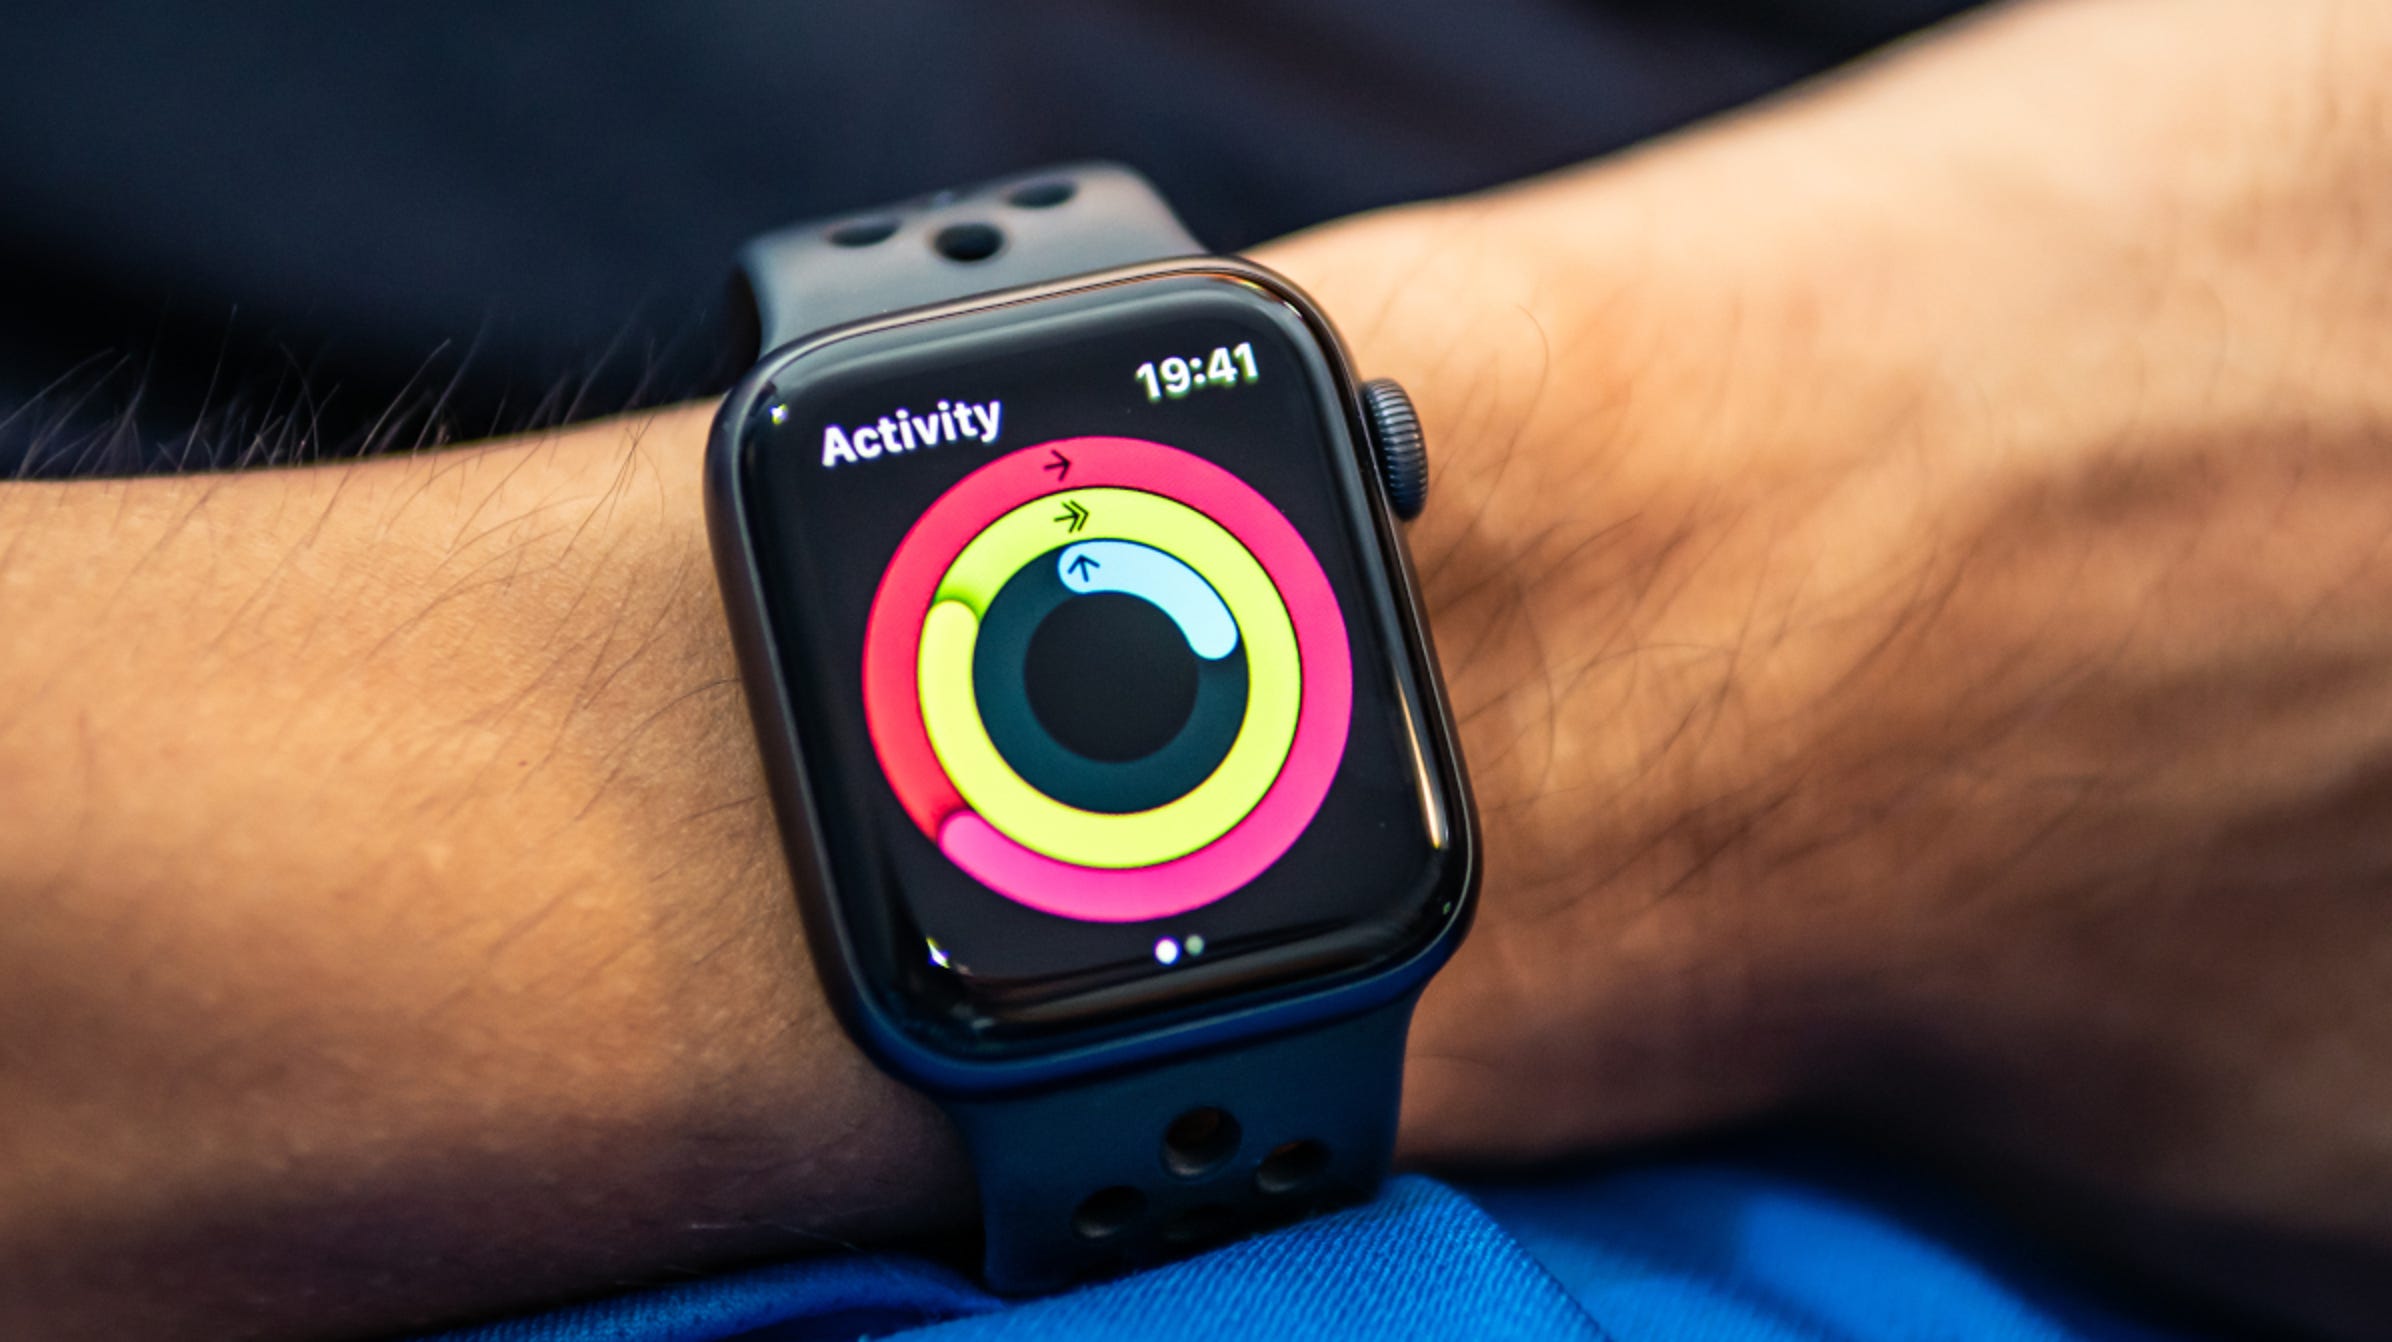 How to Change Your Move Goal on Apple Watch